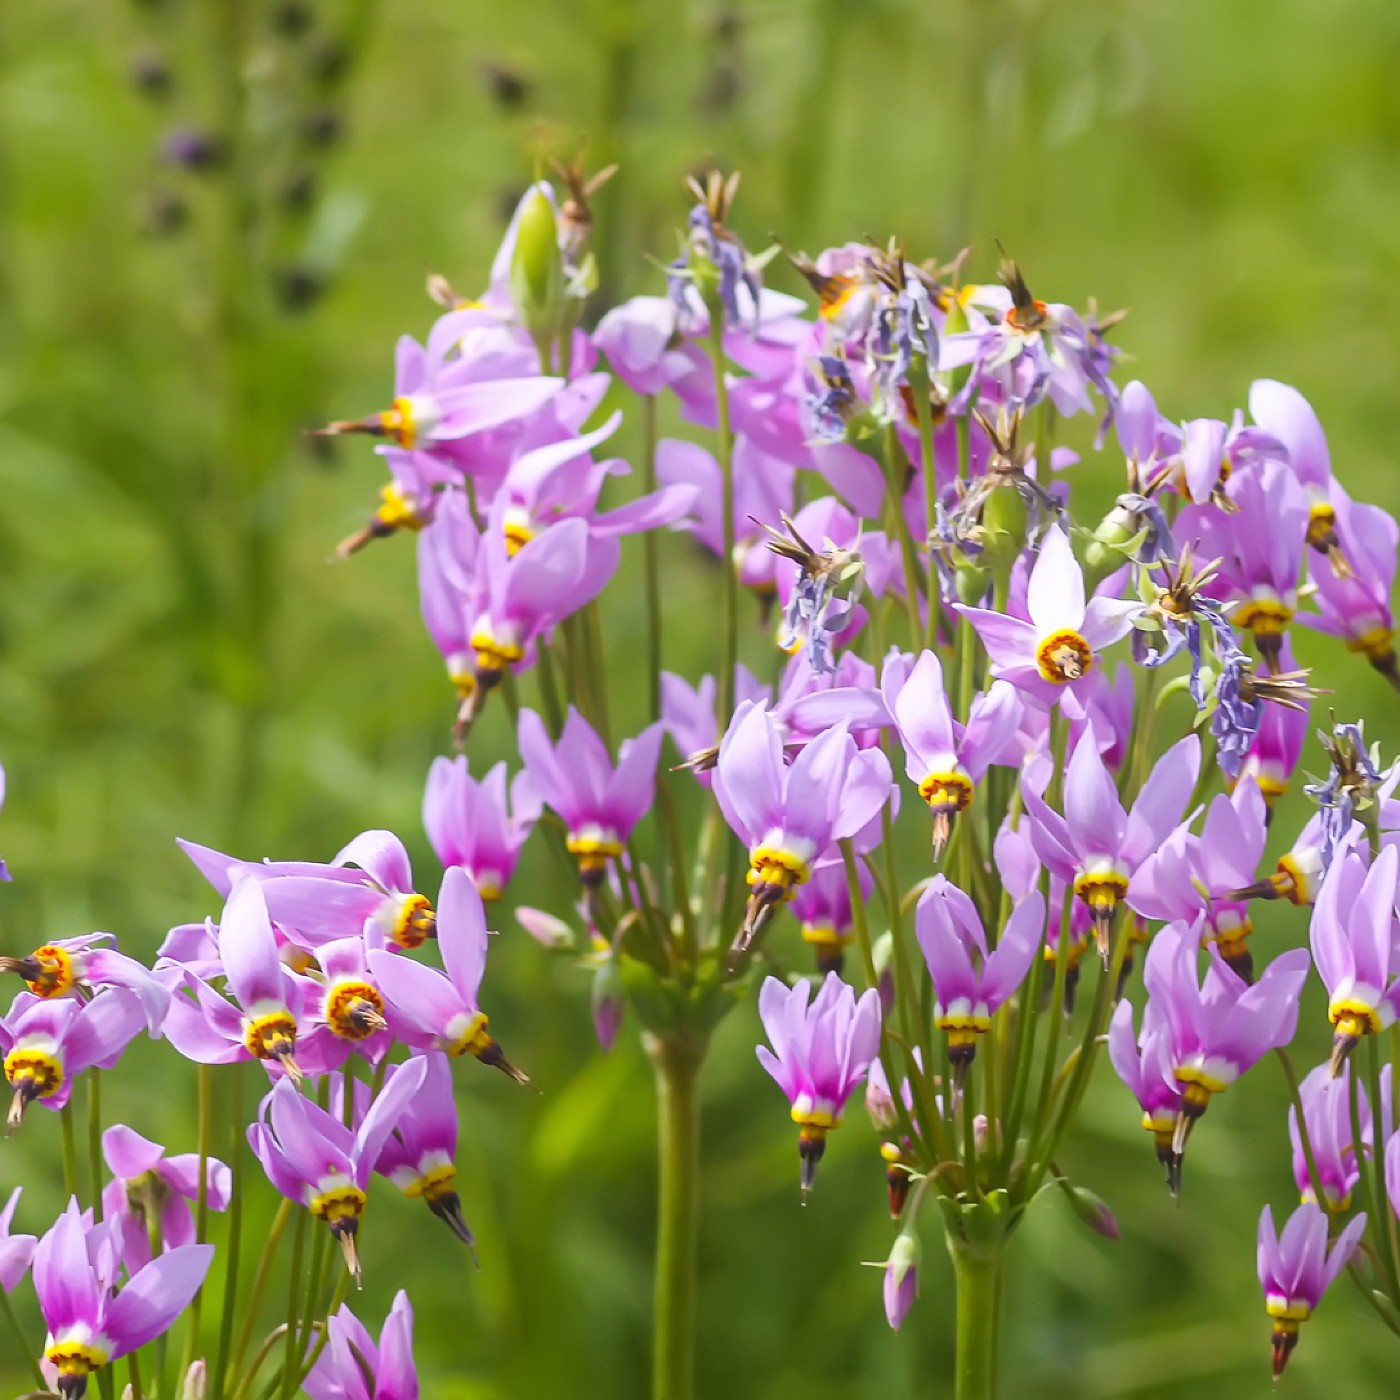 Shooting Star Seeds (Dodecatheon meadia)